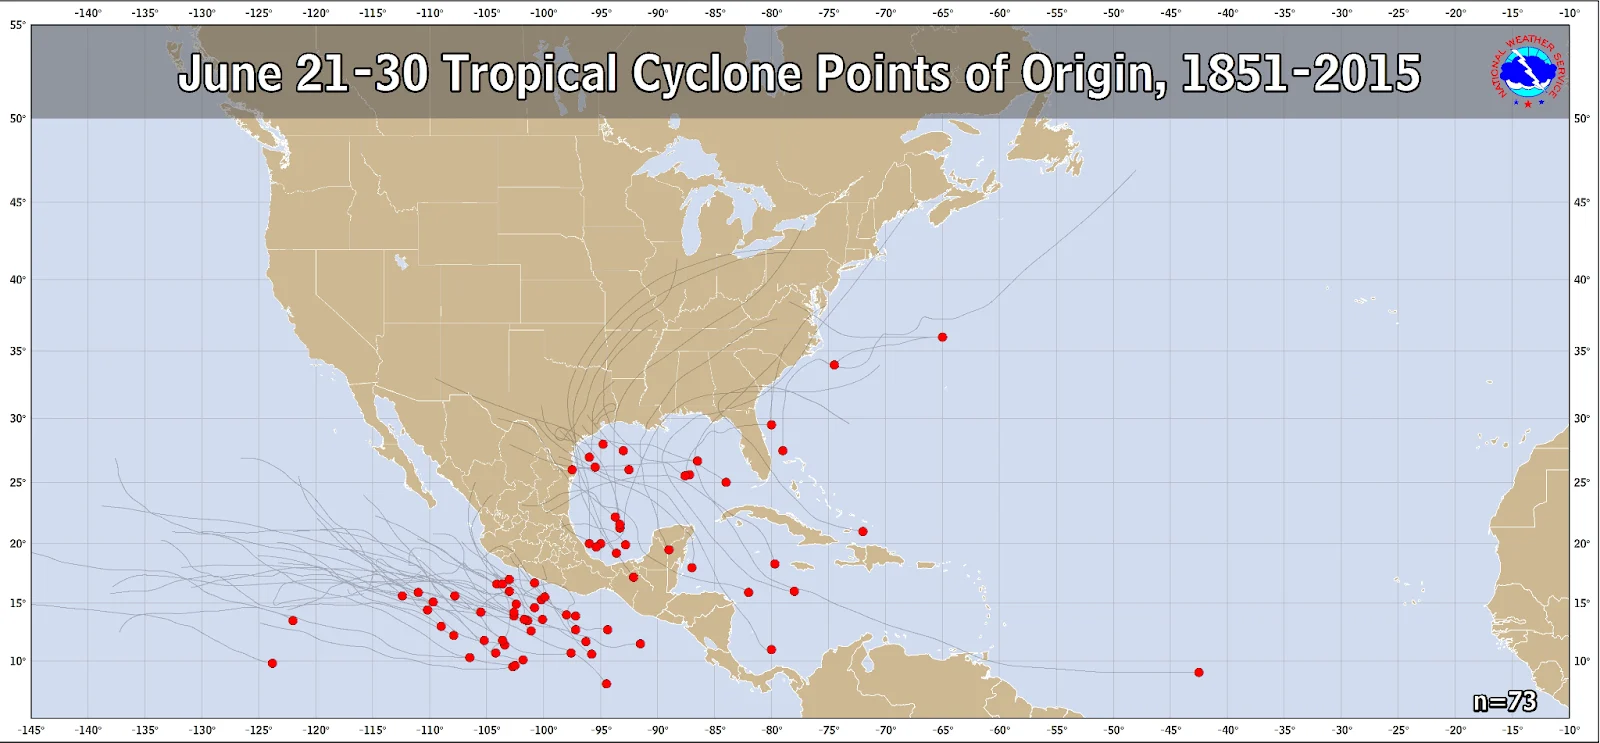 June 21-30 cyclones point of origin (Courtesy: NWS)